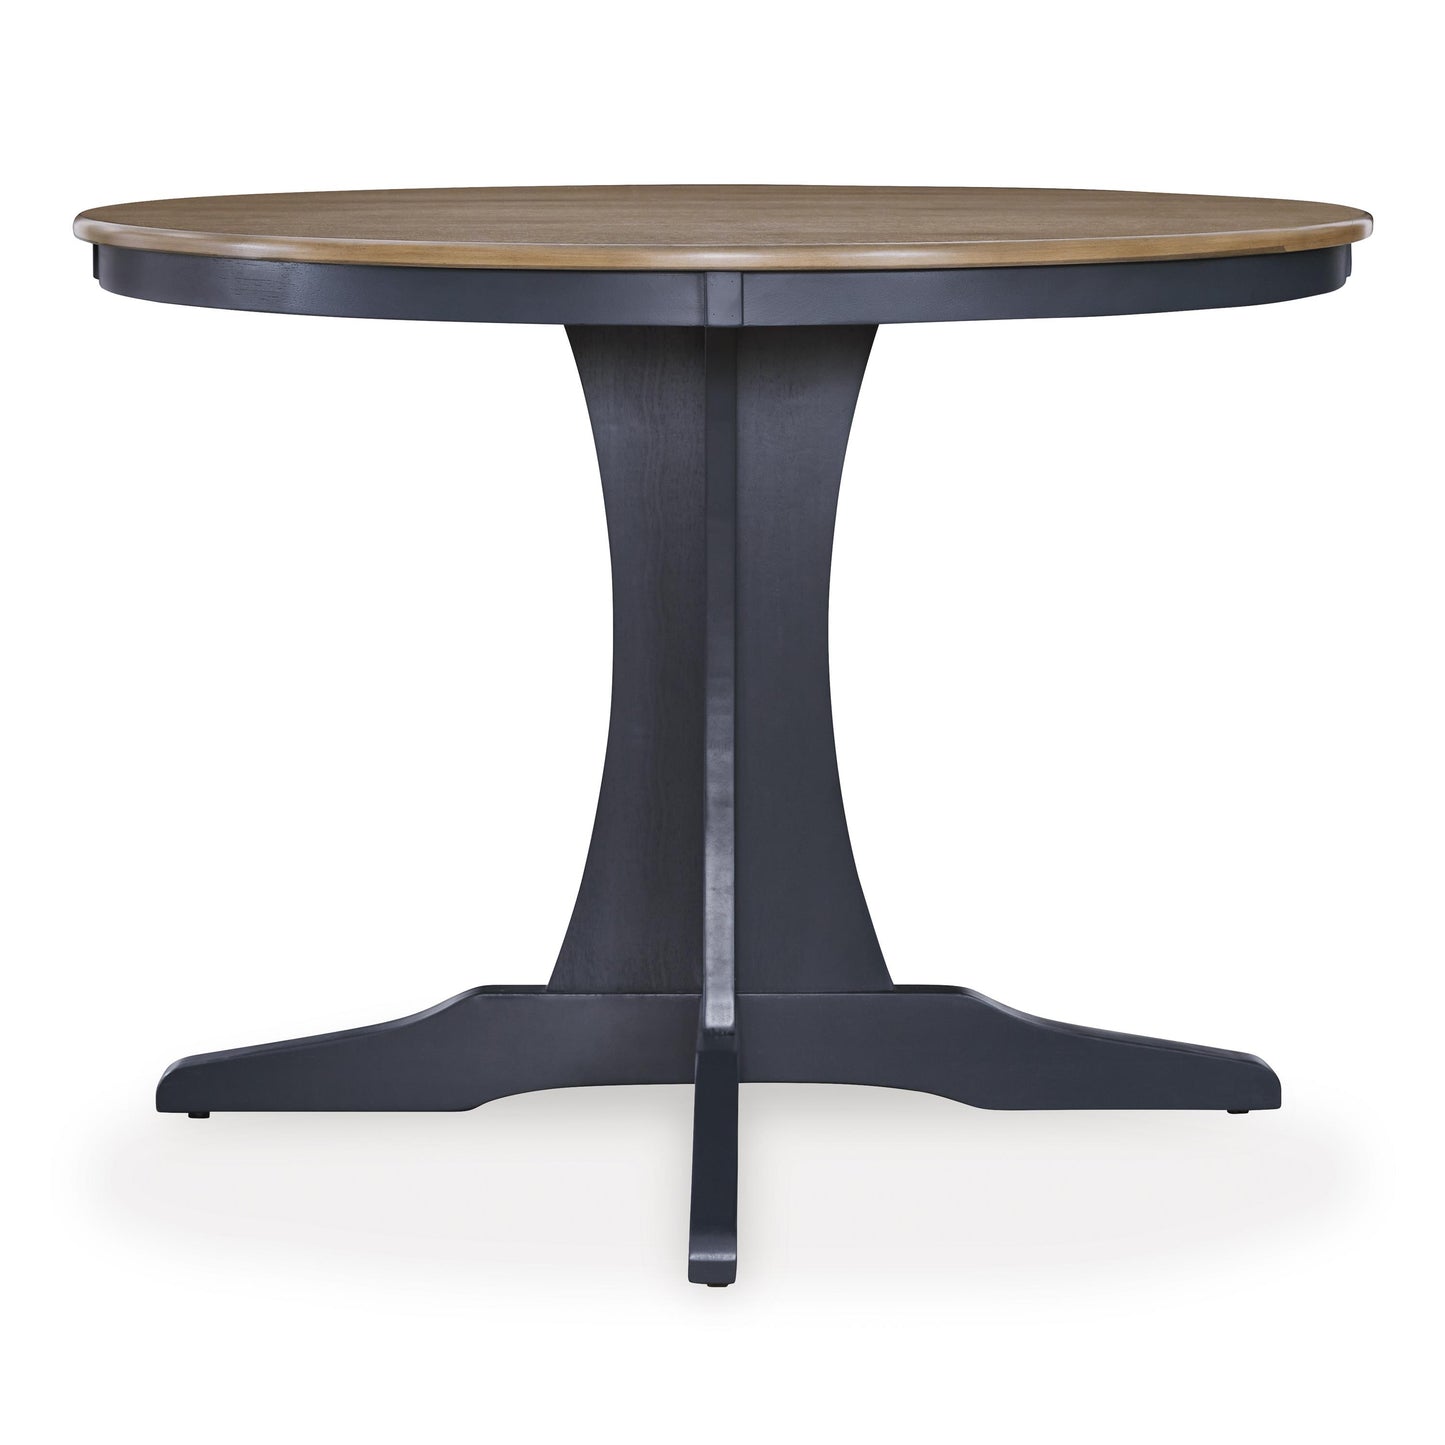 Signature Design by Ashley Round Landocken Dining Table with Pedestal Base D502-15 IMAGE 2